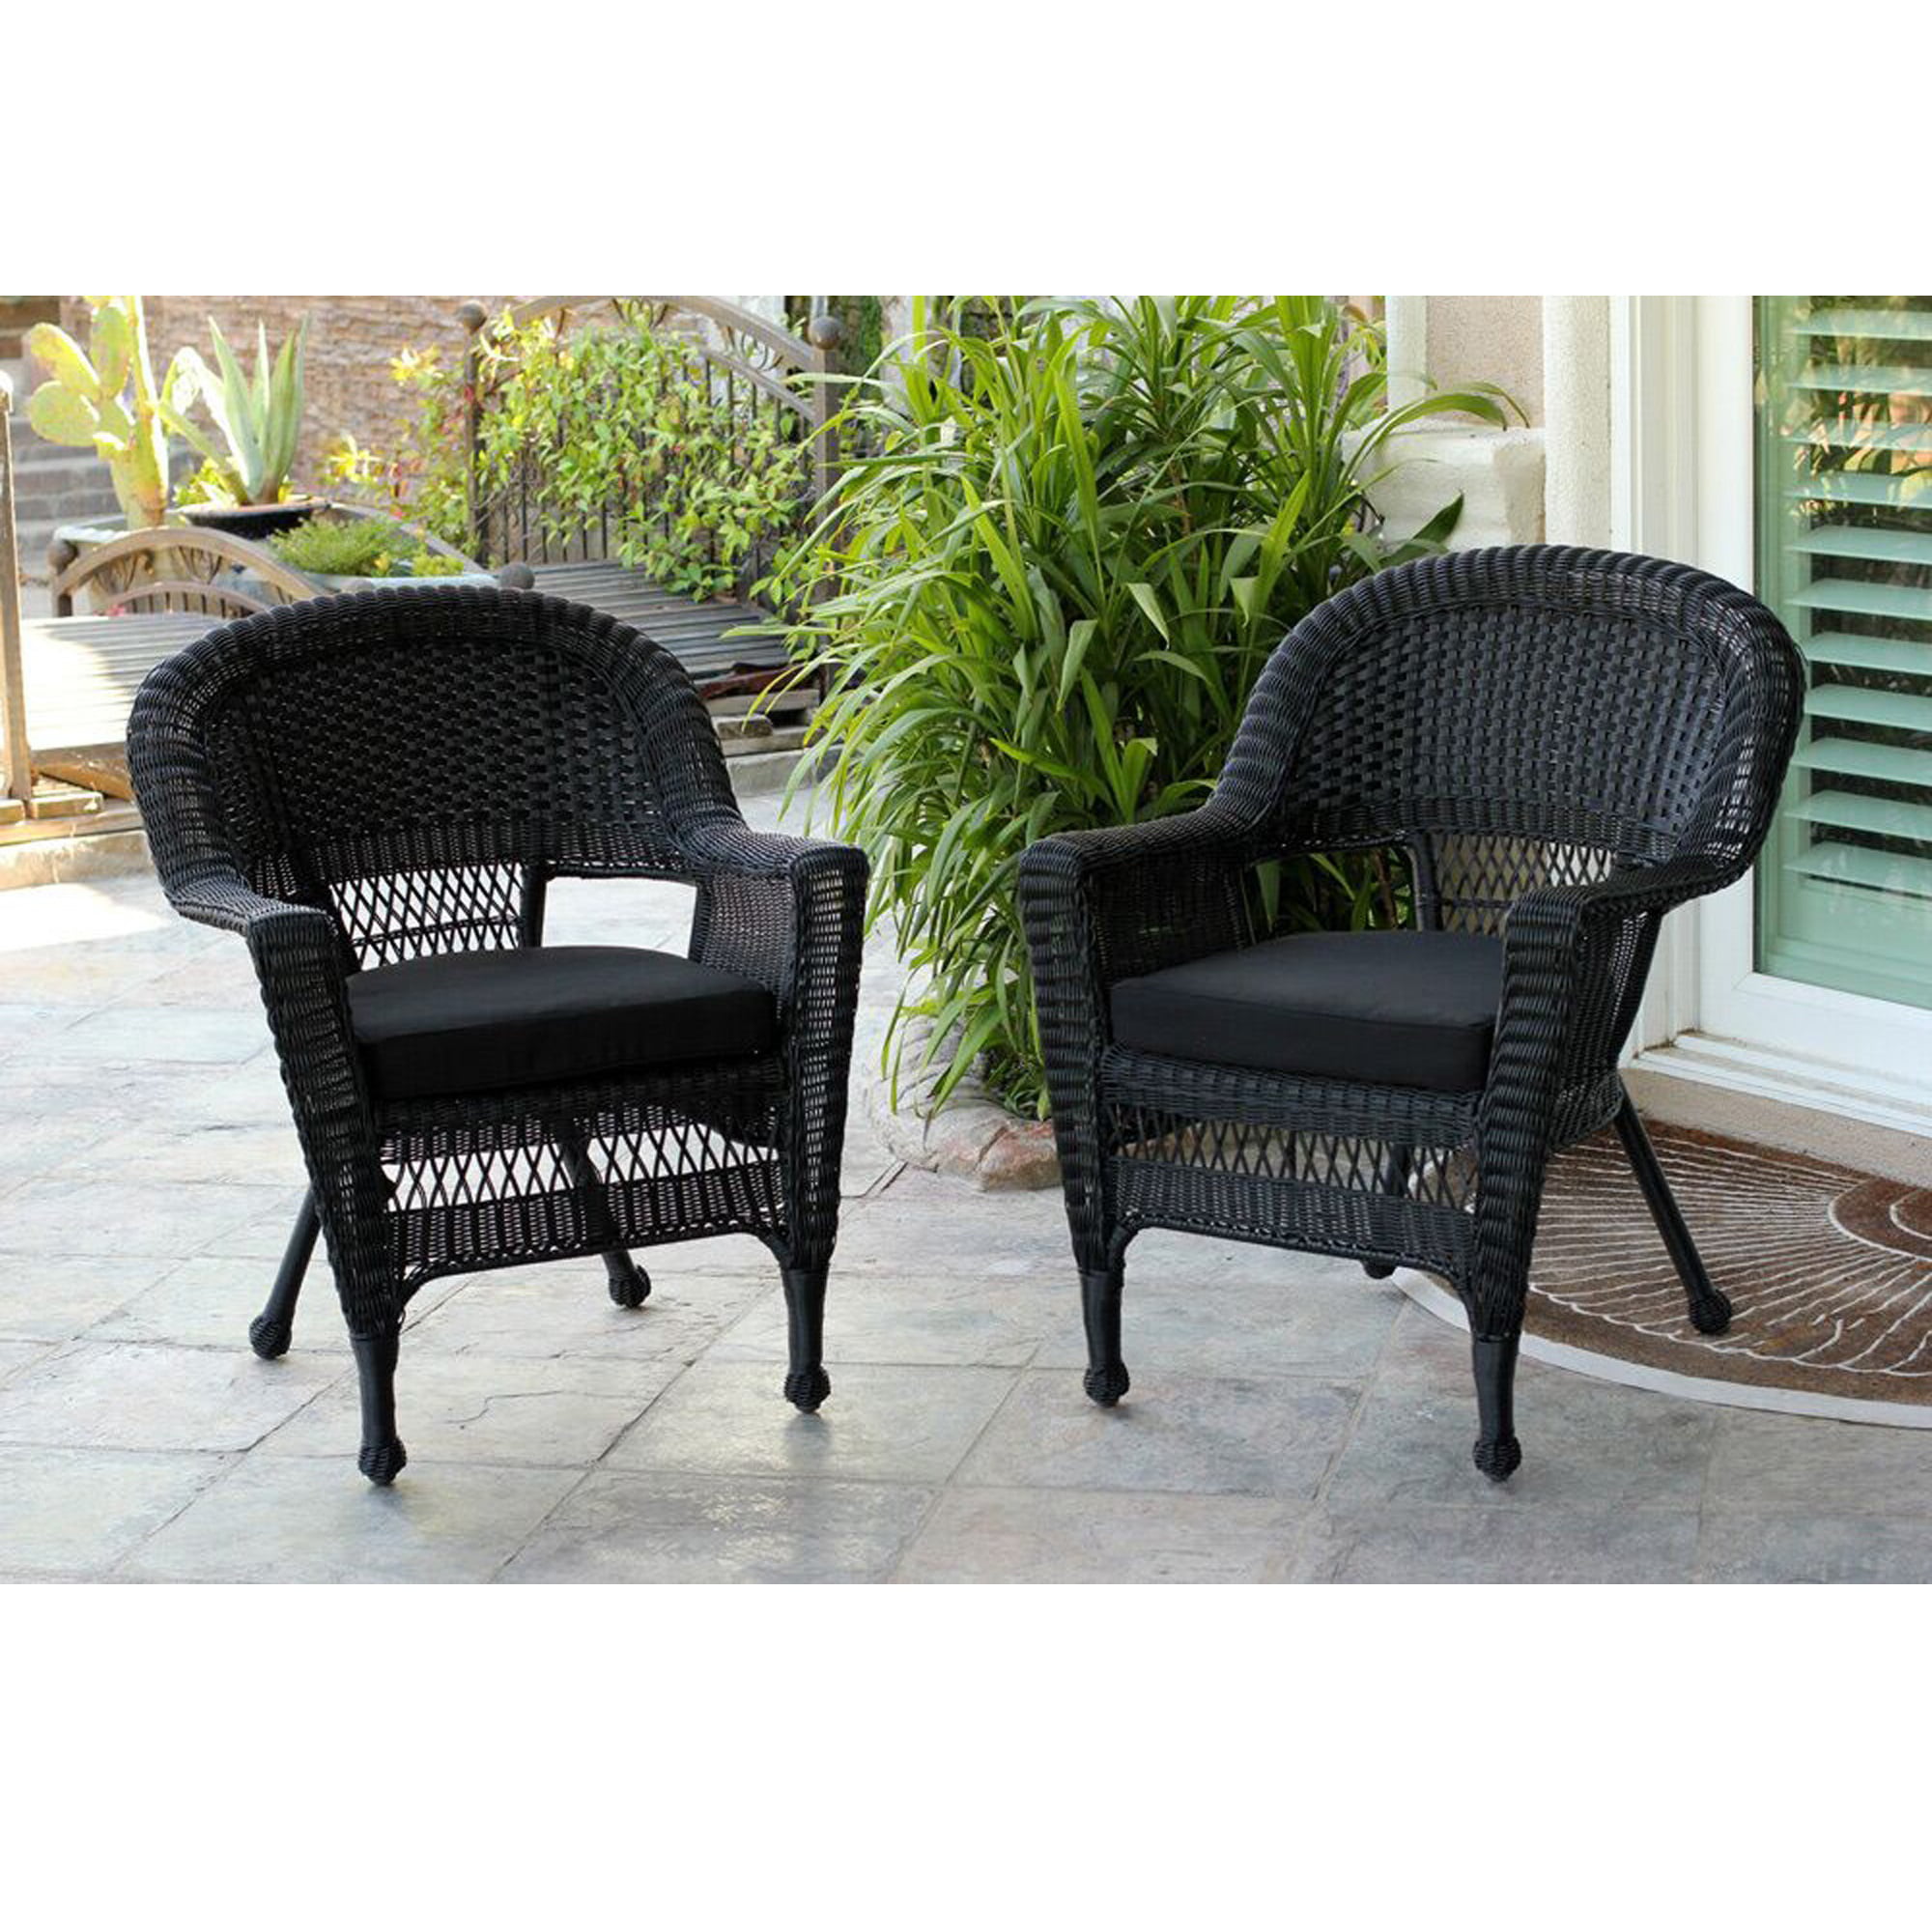 set of 2 black resin wicker outdoor patio garden chairs with black